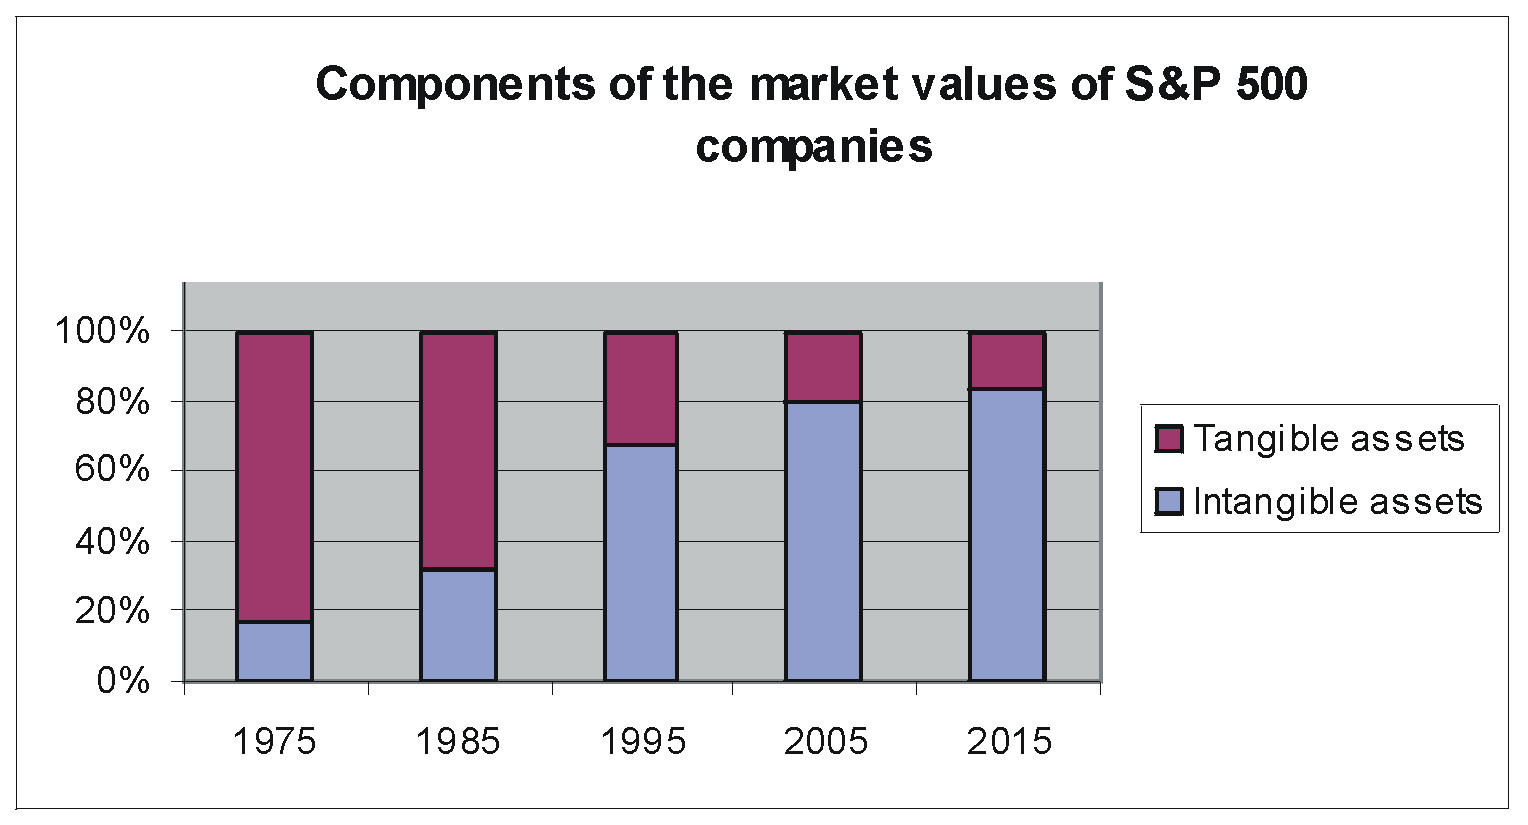 Fig. 1. The evolution of the components of the market values of the companies listed in S&P 500 (source: Ocean Tomo, 2015) 